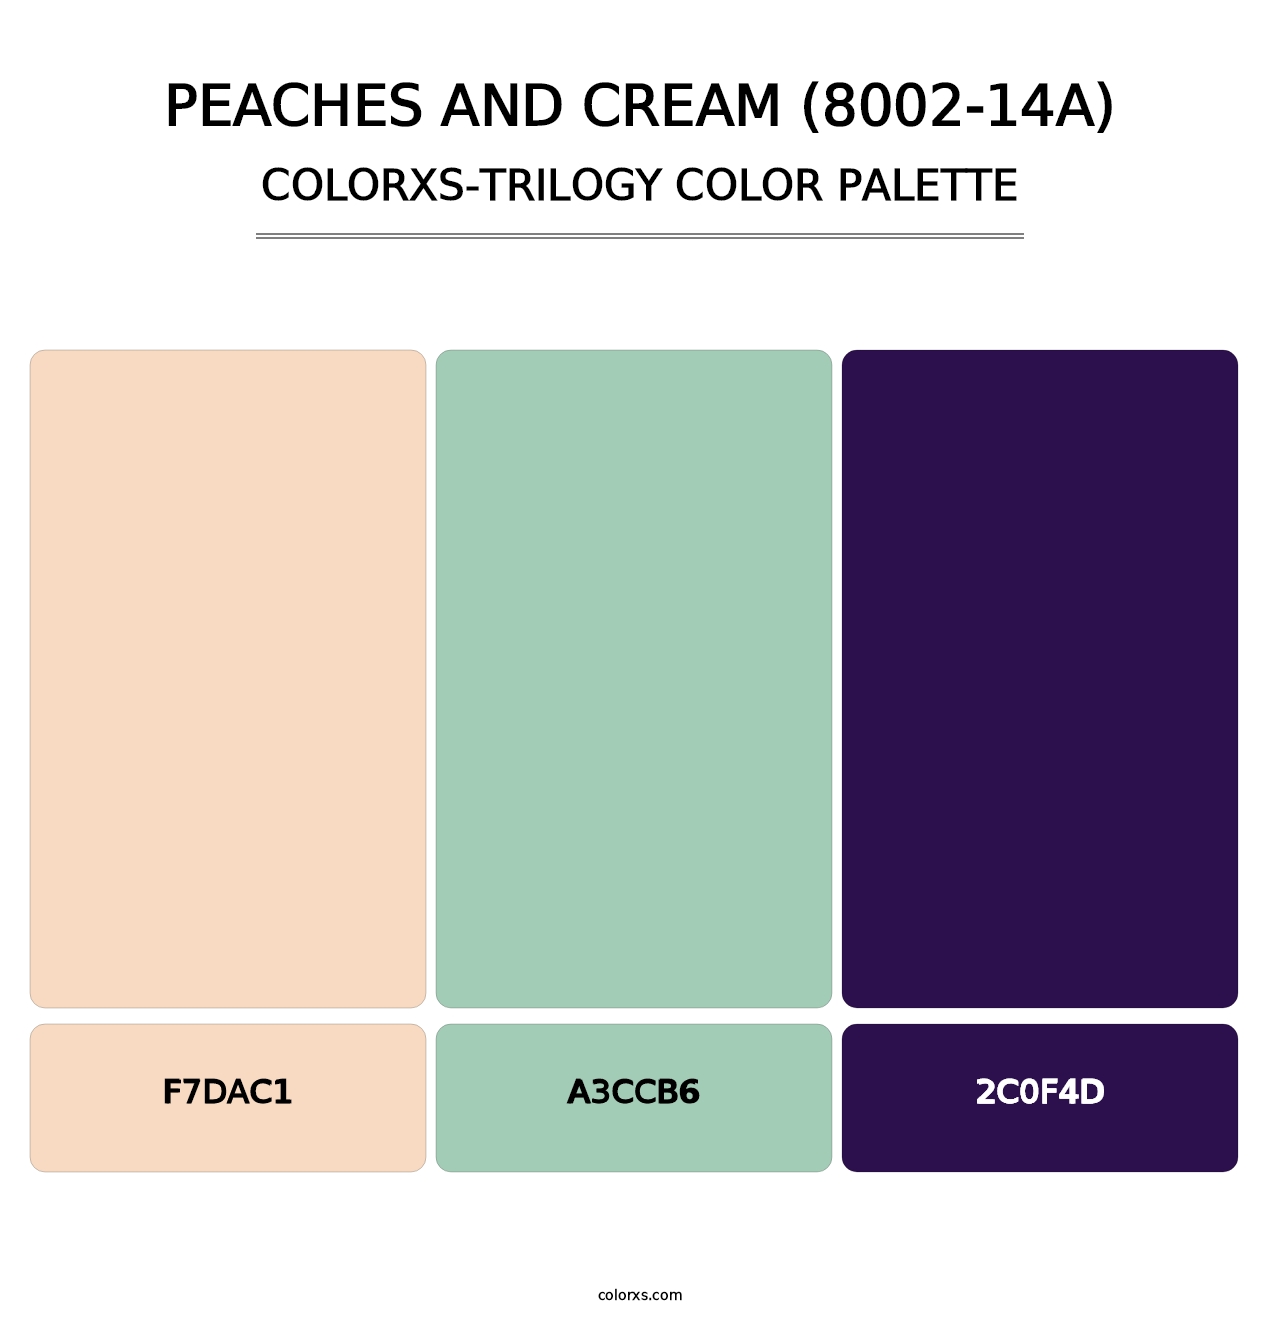 Peaches and Cream (8002-14A) - Colorxs Trilogy Palette